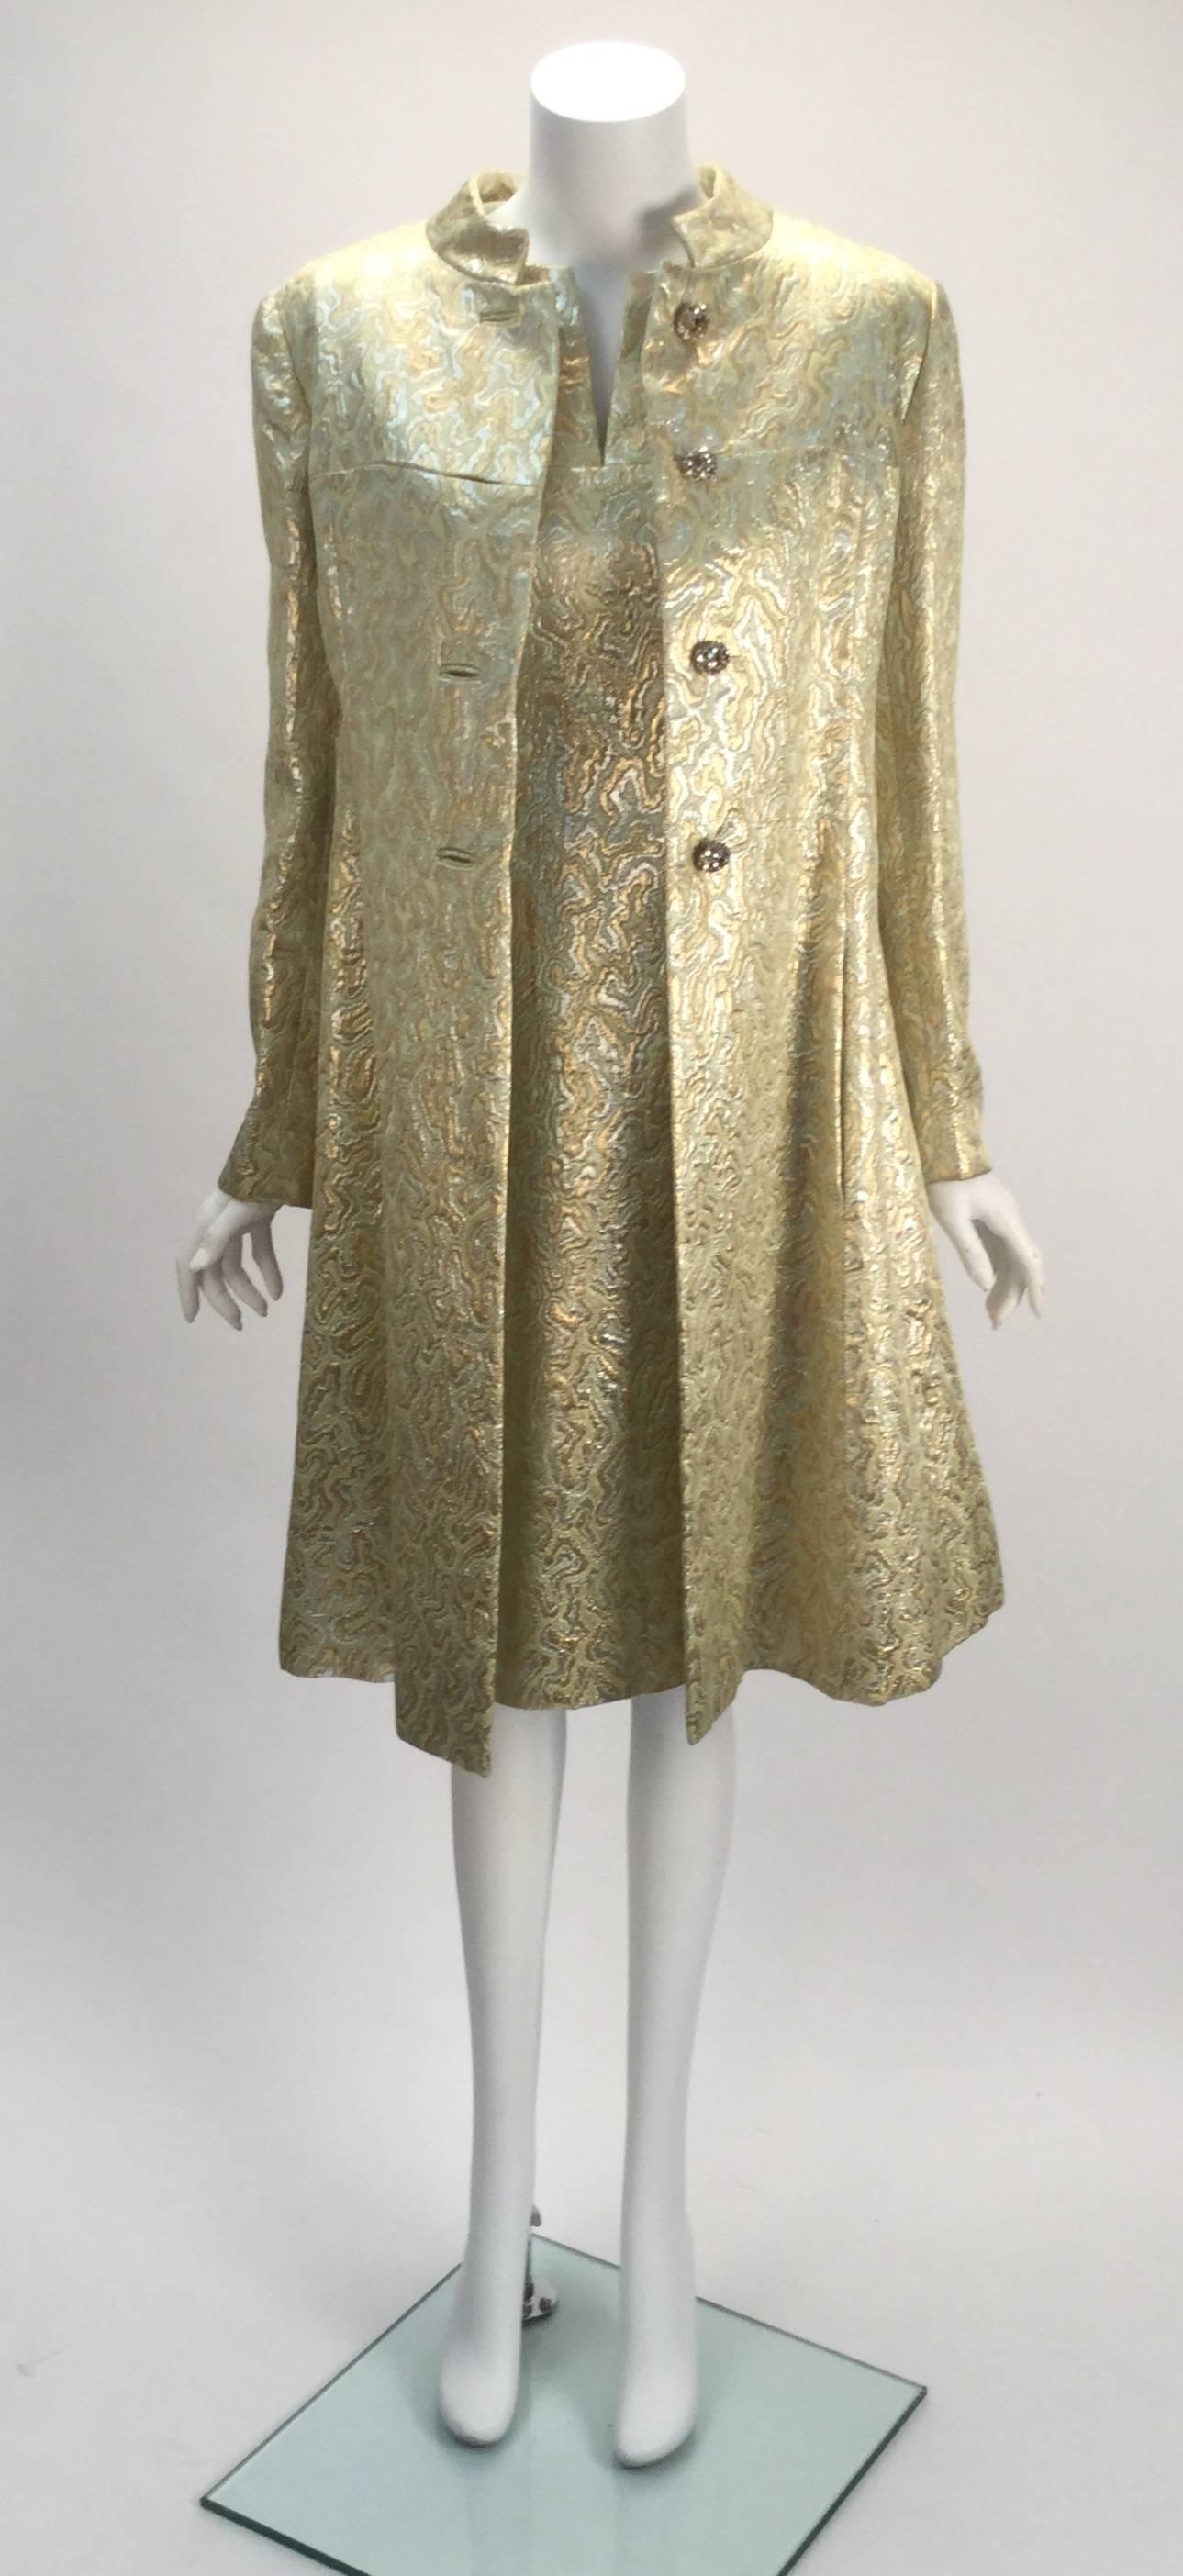 
1960's Malcolm Starr gold and silver metallic colored  three piece evening ensemble. The sleeveless dress has two hidden pockets in front and a zippered back closure. 
The long sleeve jacket has round rhinestone trim buttons for closing at center